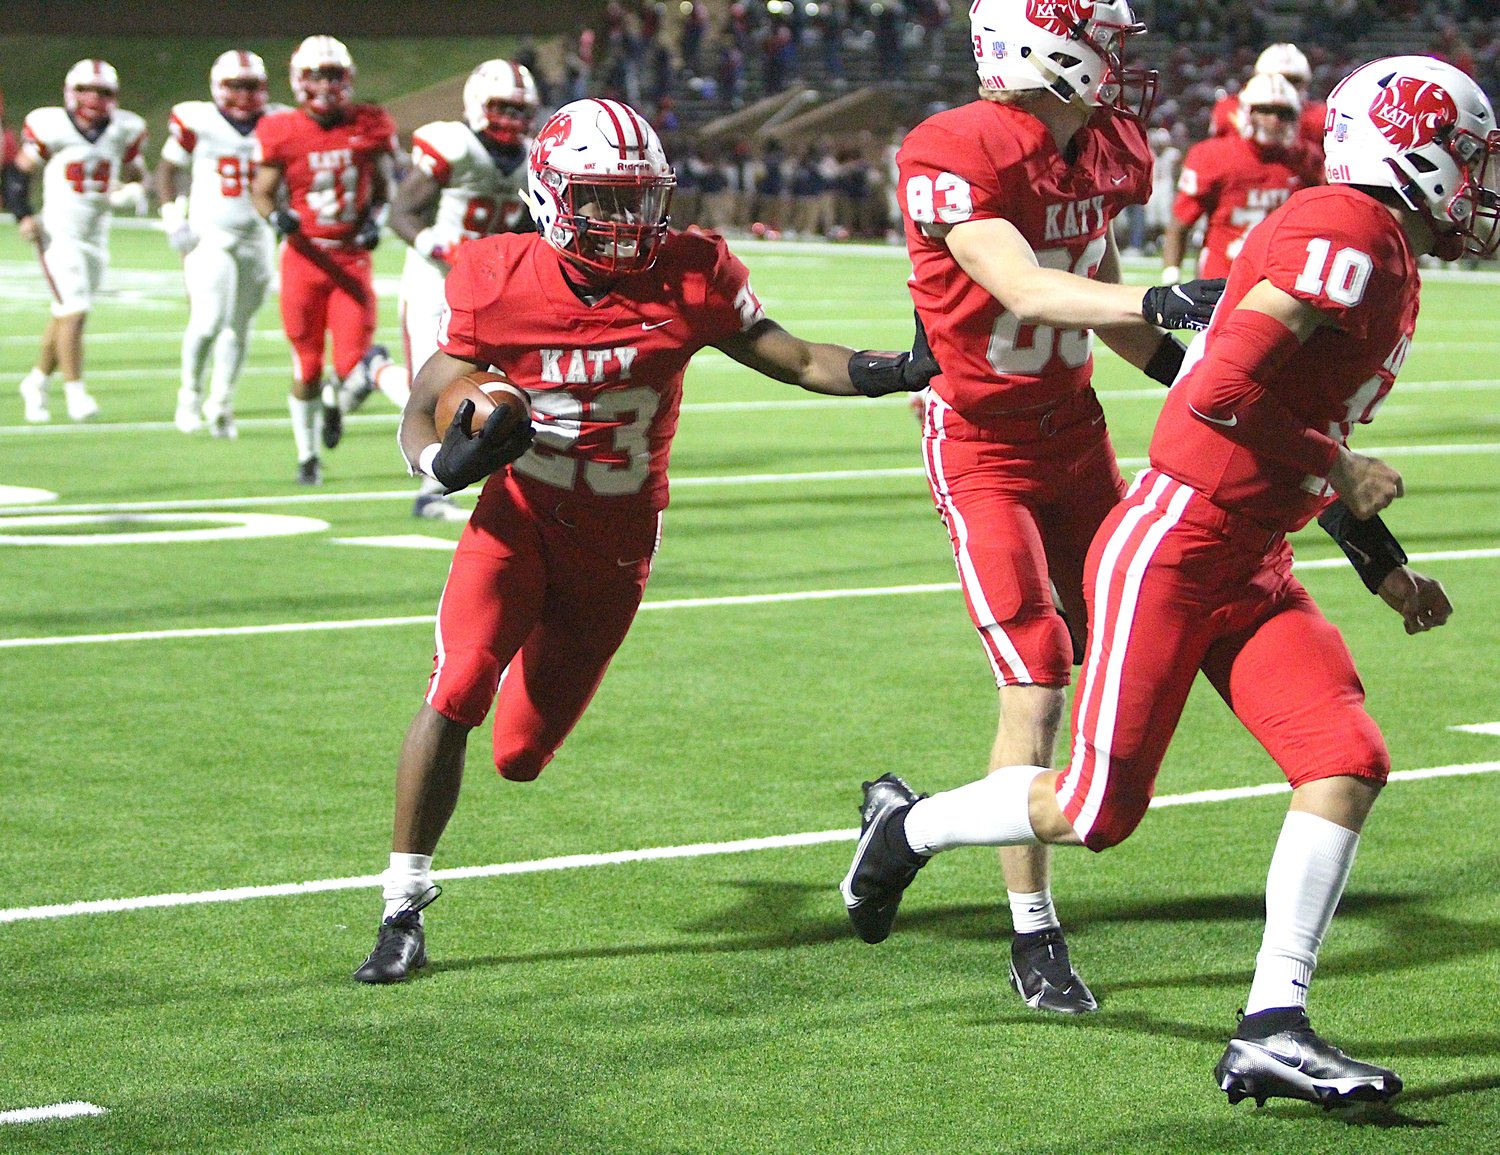 Katy High sophomore running back Seth Davis follows his blocks en route to a touchdown during the Tigers’ Class 6A-Division II area playoff win over Lamar on Dec. 18 at Rhodes Stadium.